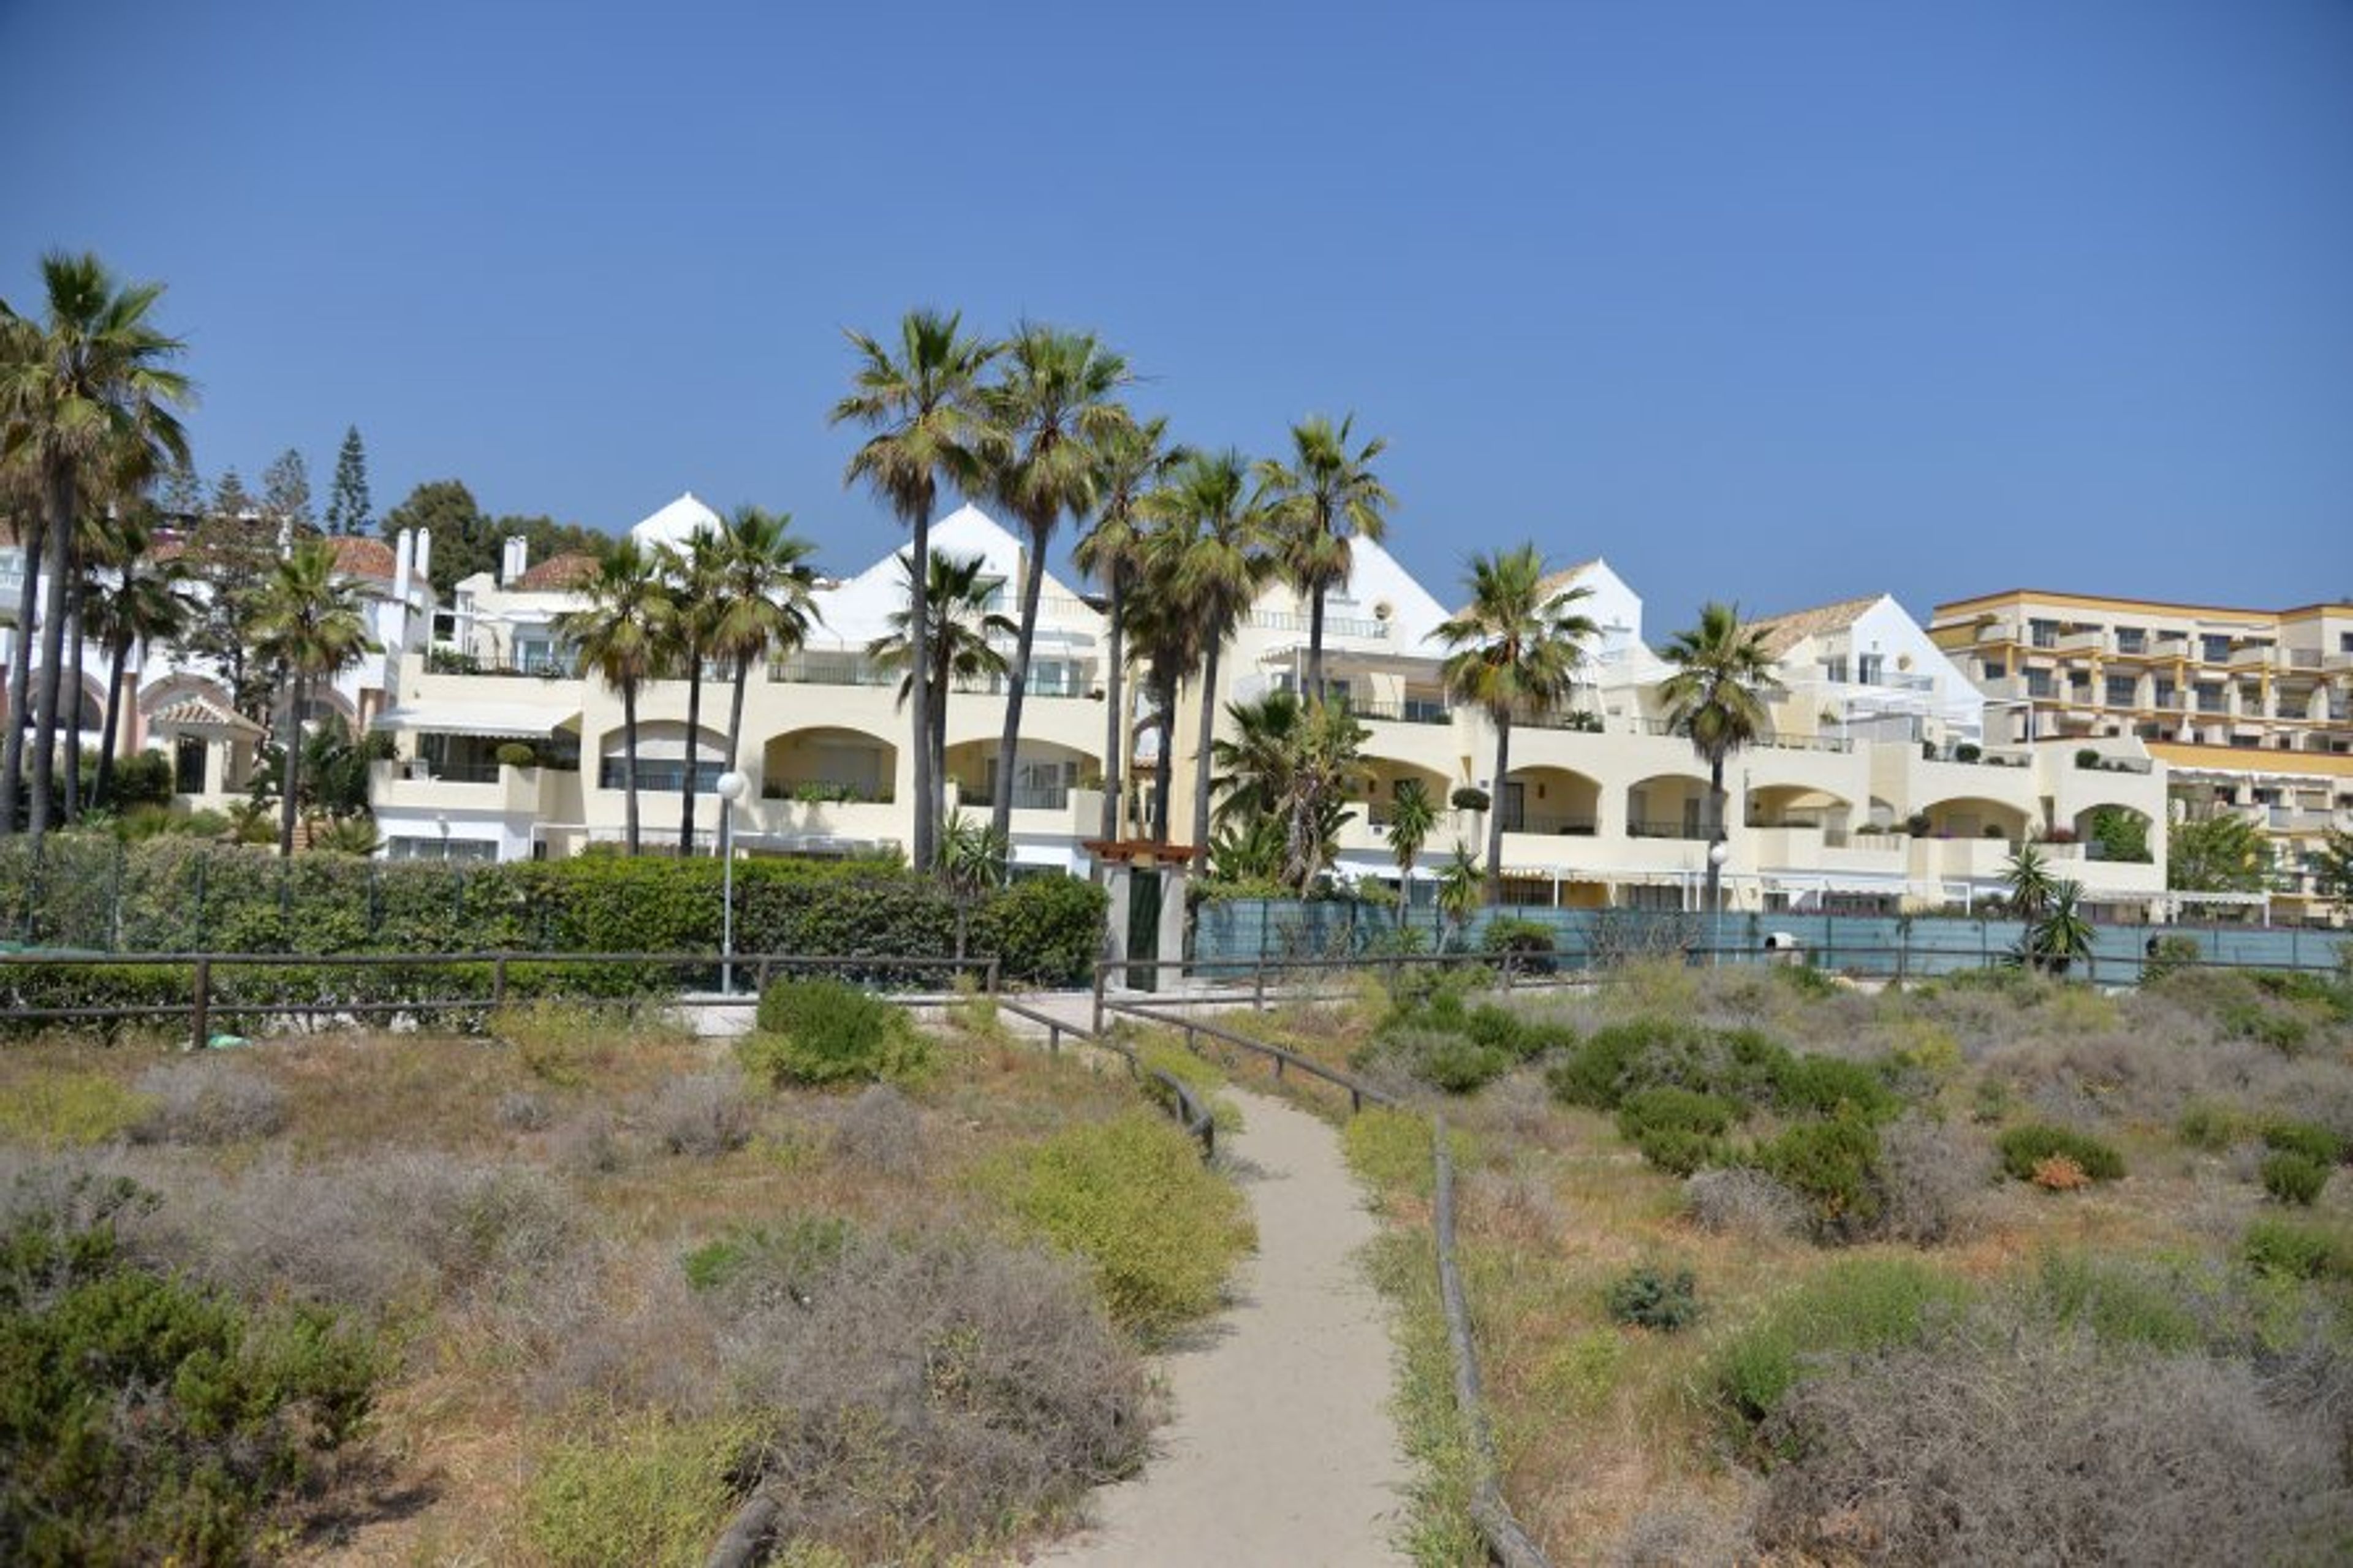 View of the complex from the beach